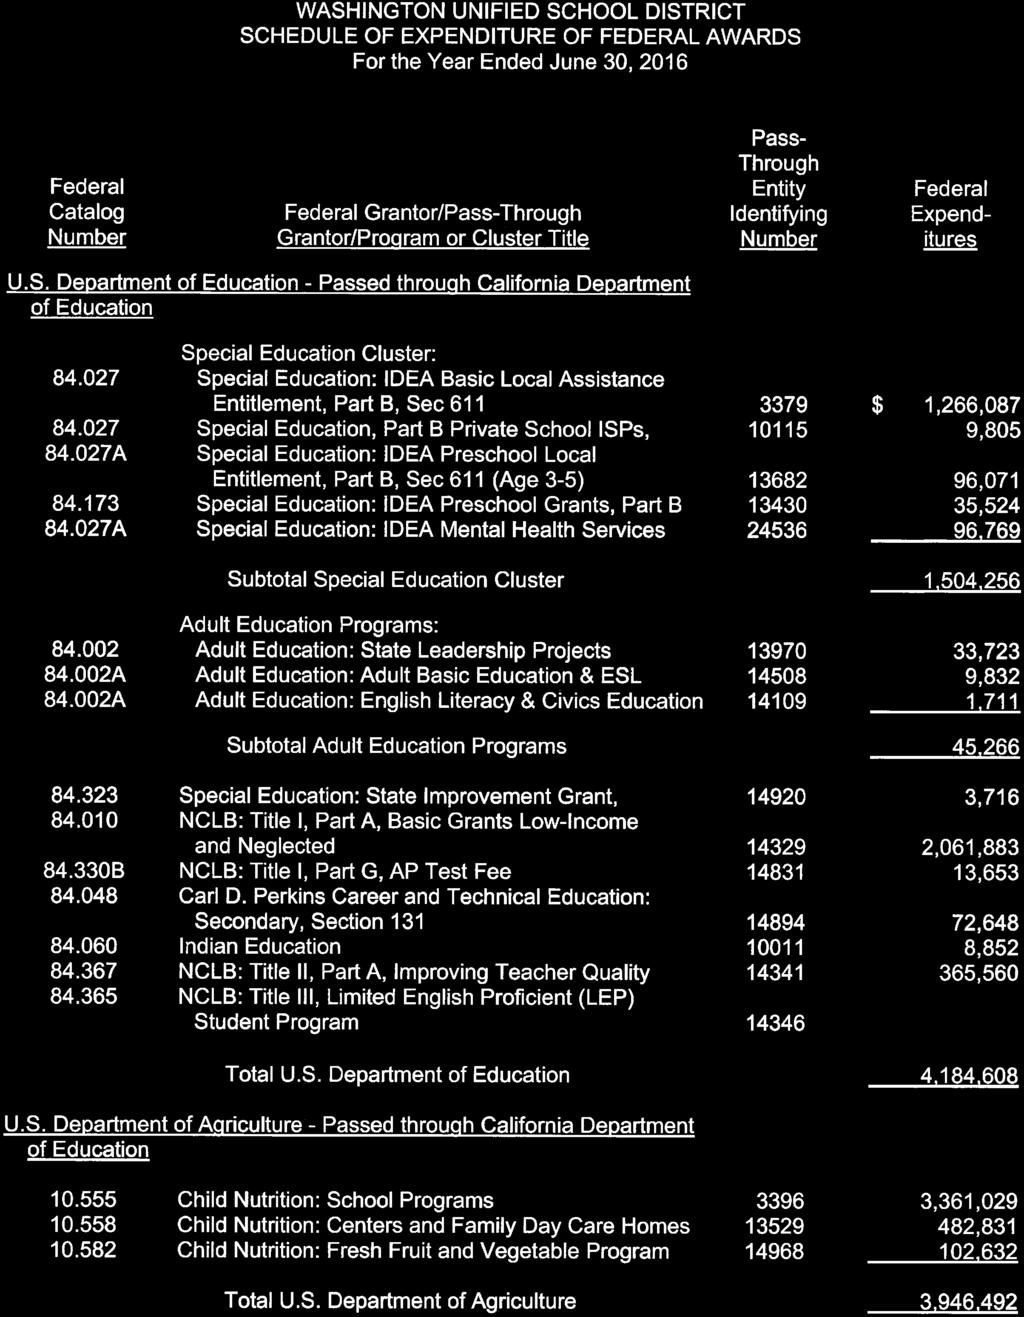 WASHINGTON UNIFIED SCHOOL DISTRICT SCHEDULE OF EXPENDITURE OF FEDERAL AWARDS For the Year Ended June 30, 2016 Federal Catalog Number Federal Grantor/Pass-Through Grantor/Program or Cluster Title Pass